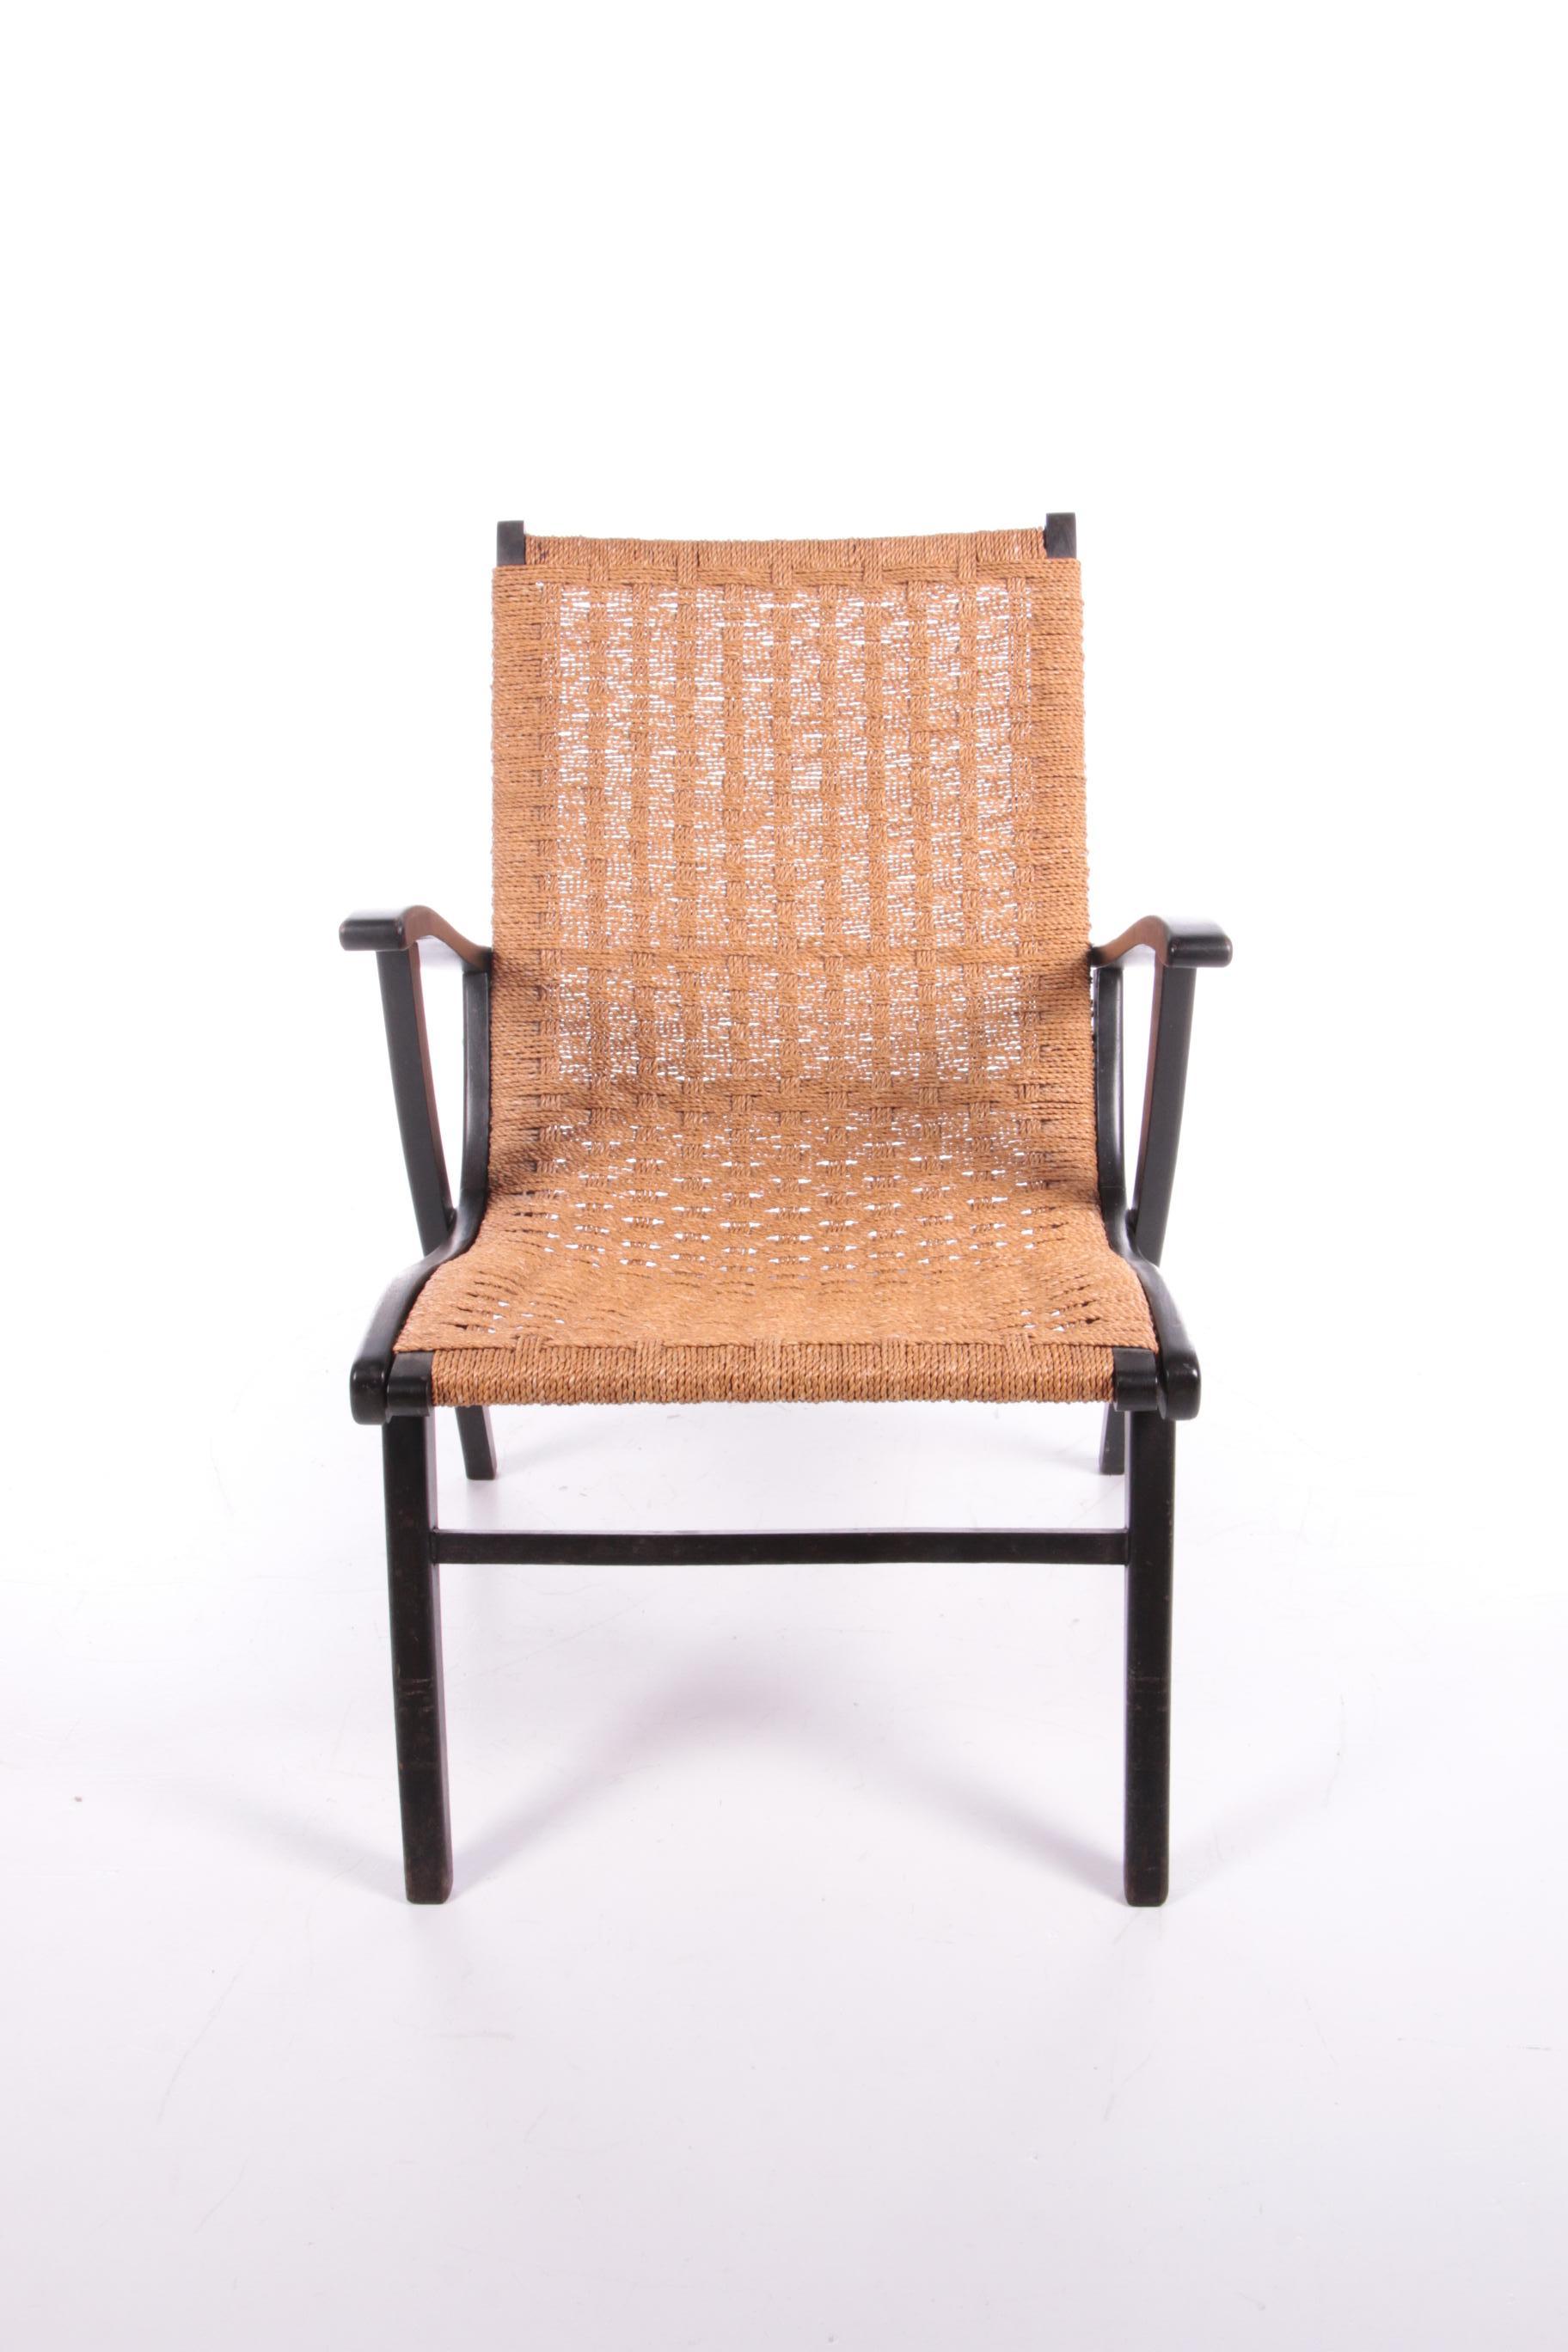 Vintage armchair with braided rope for Vroom & Dreesman from ca. 1957.

This armchair is somewhat reminiscent of Bas van Pelt's furniture (wood with rope). The frame is made of beech wood and sprayed black and the seat of braided